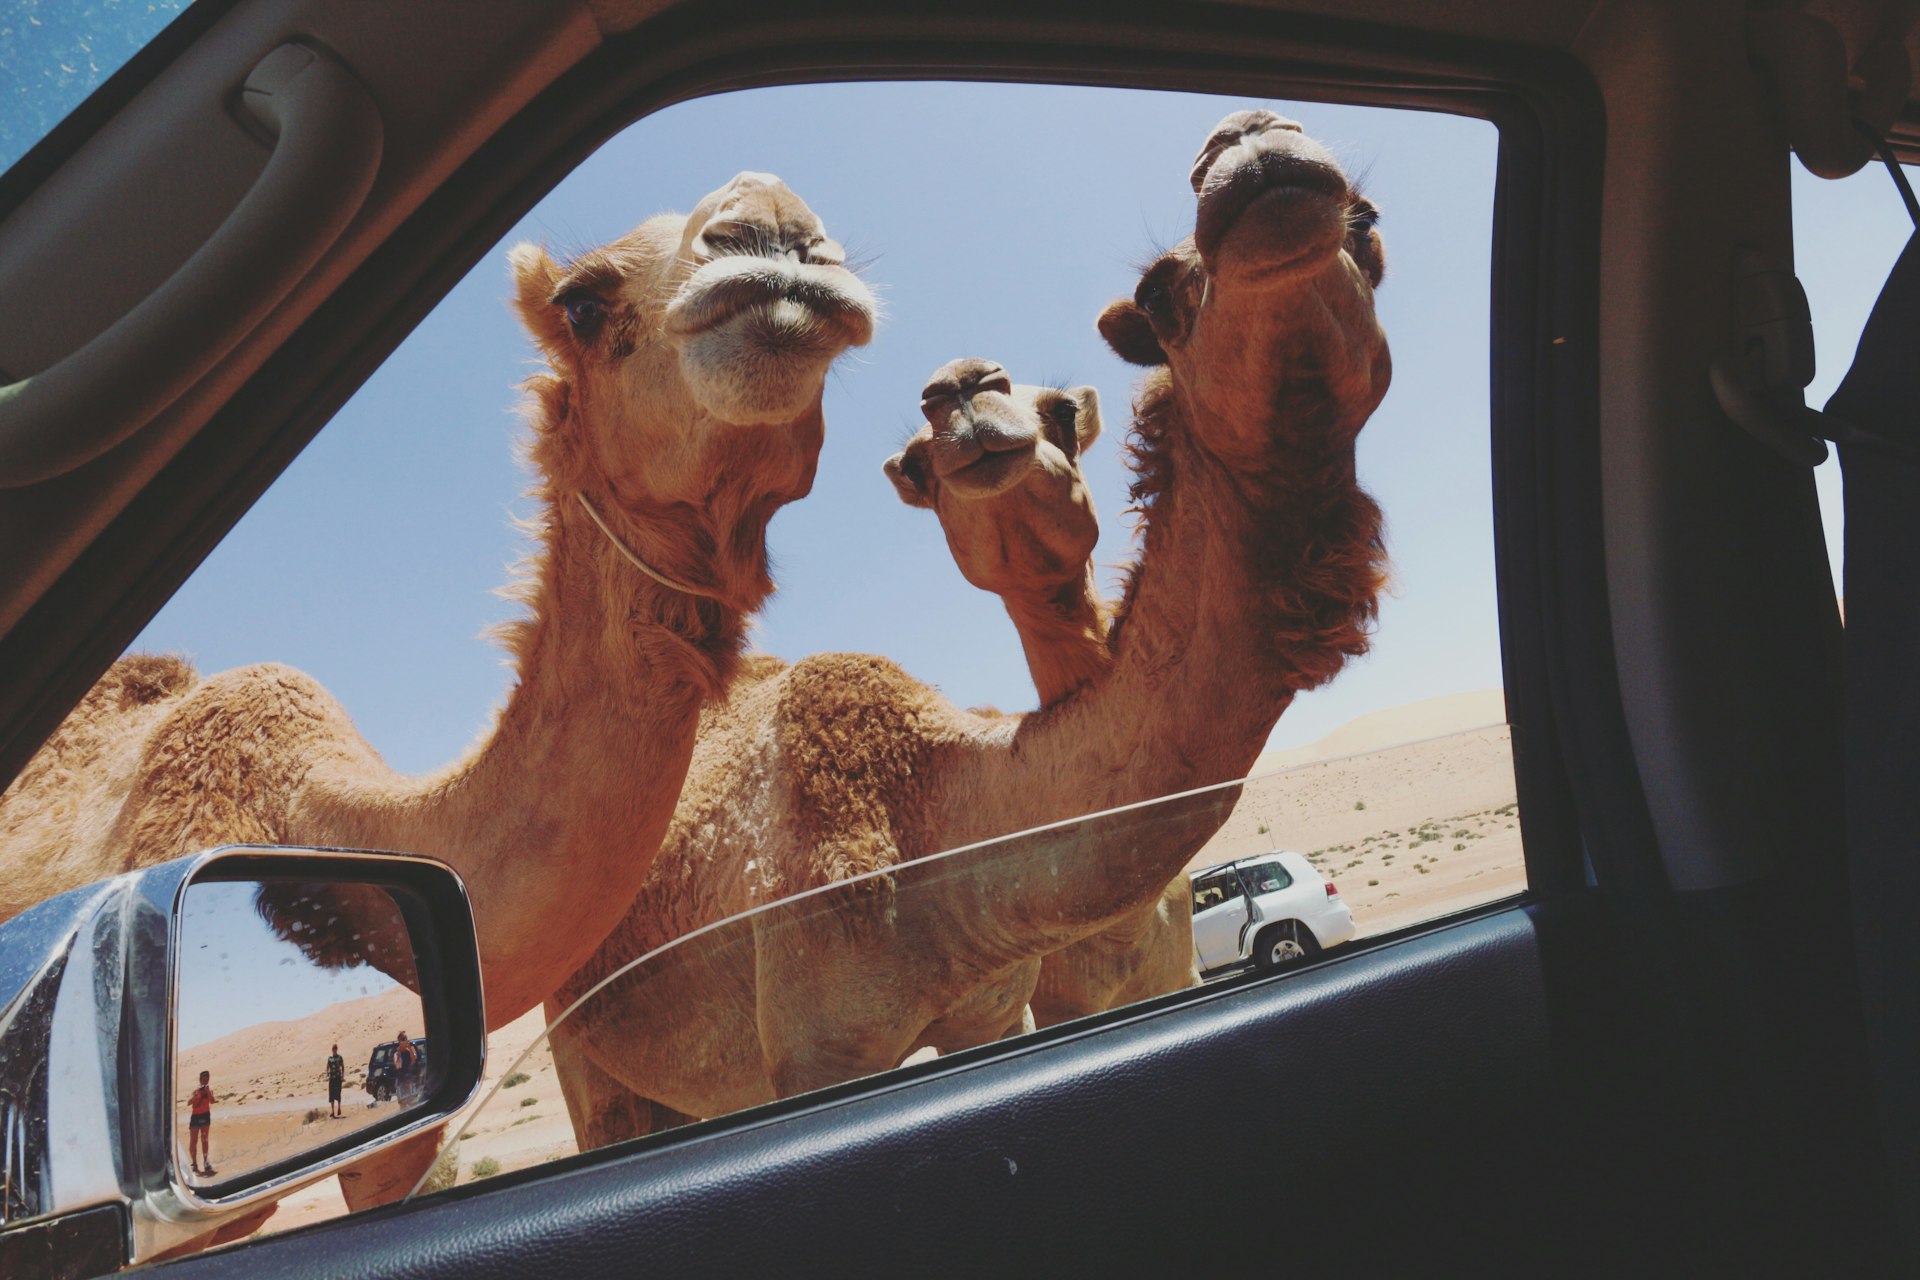 The close-in faces of three camels as shot through the open front-seat window of car